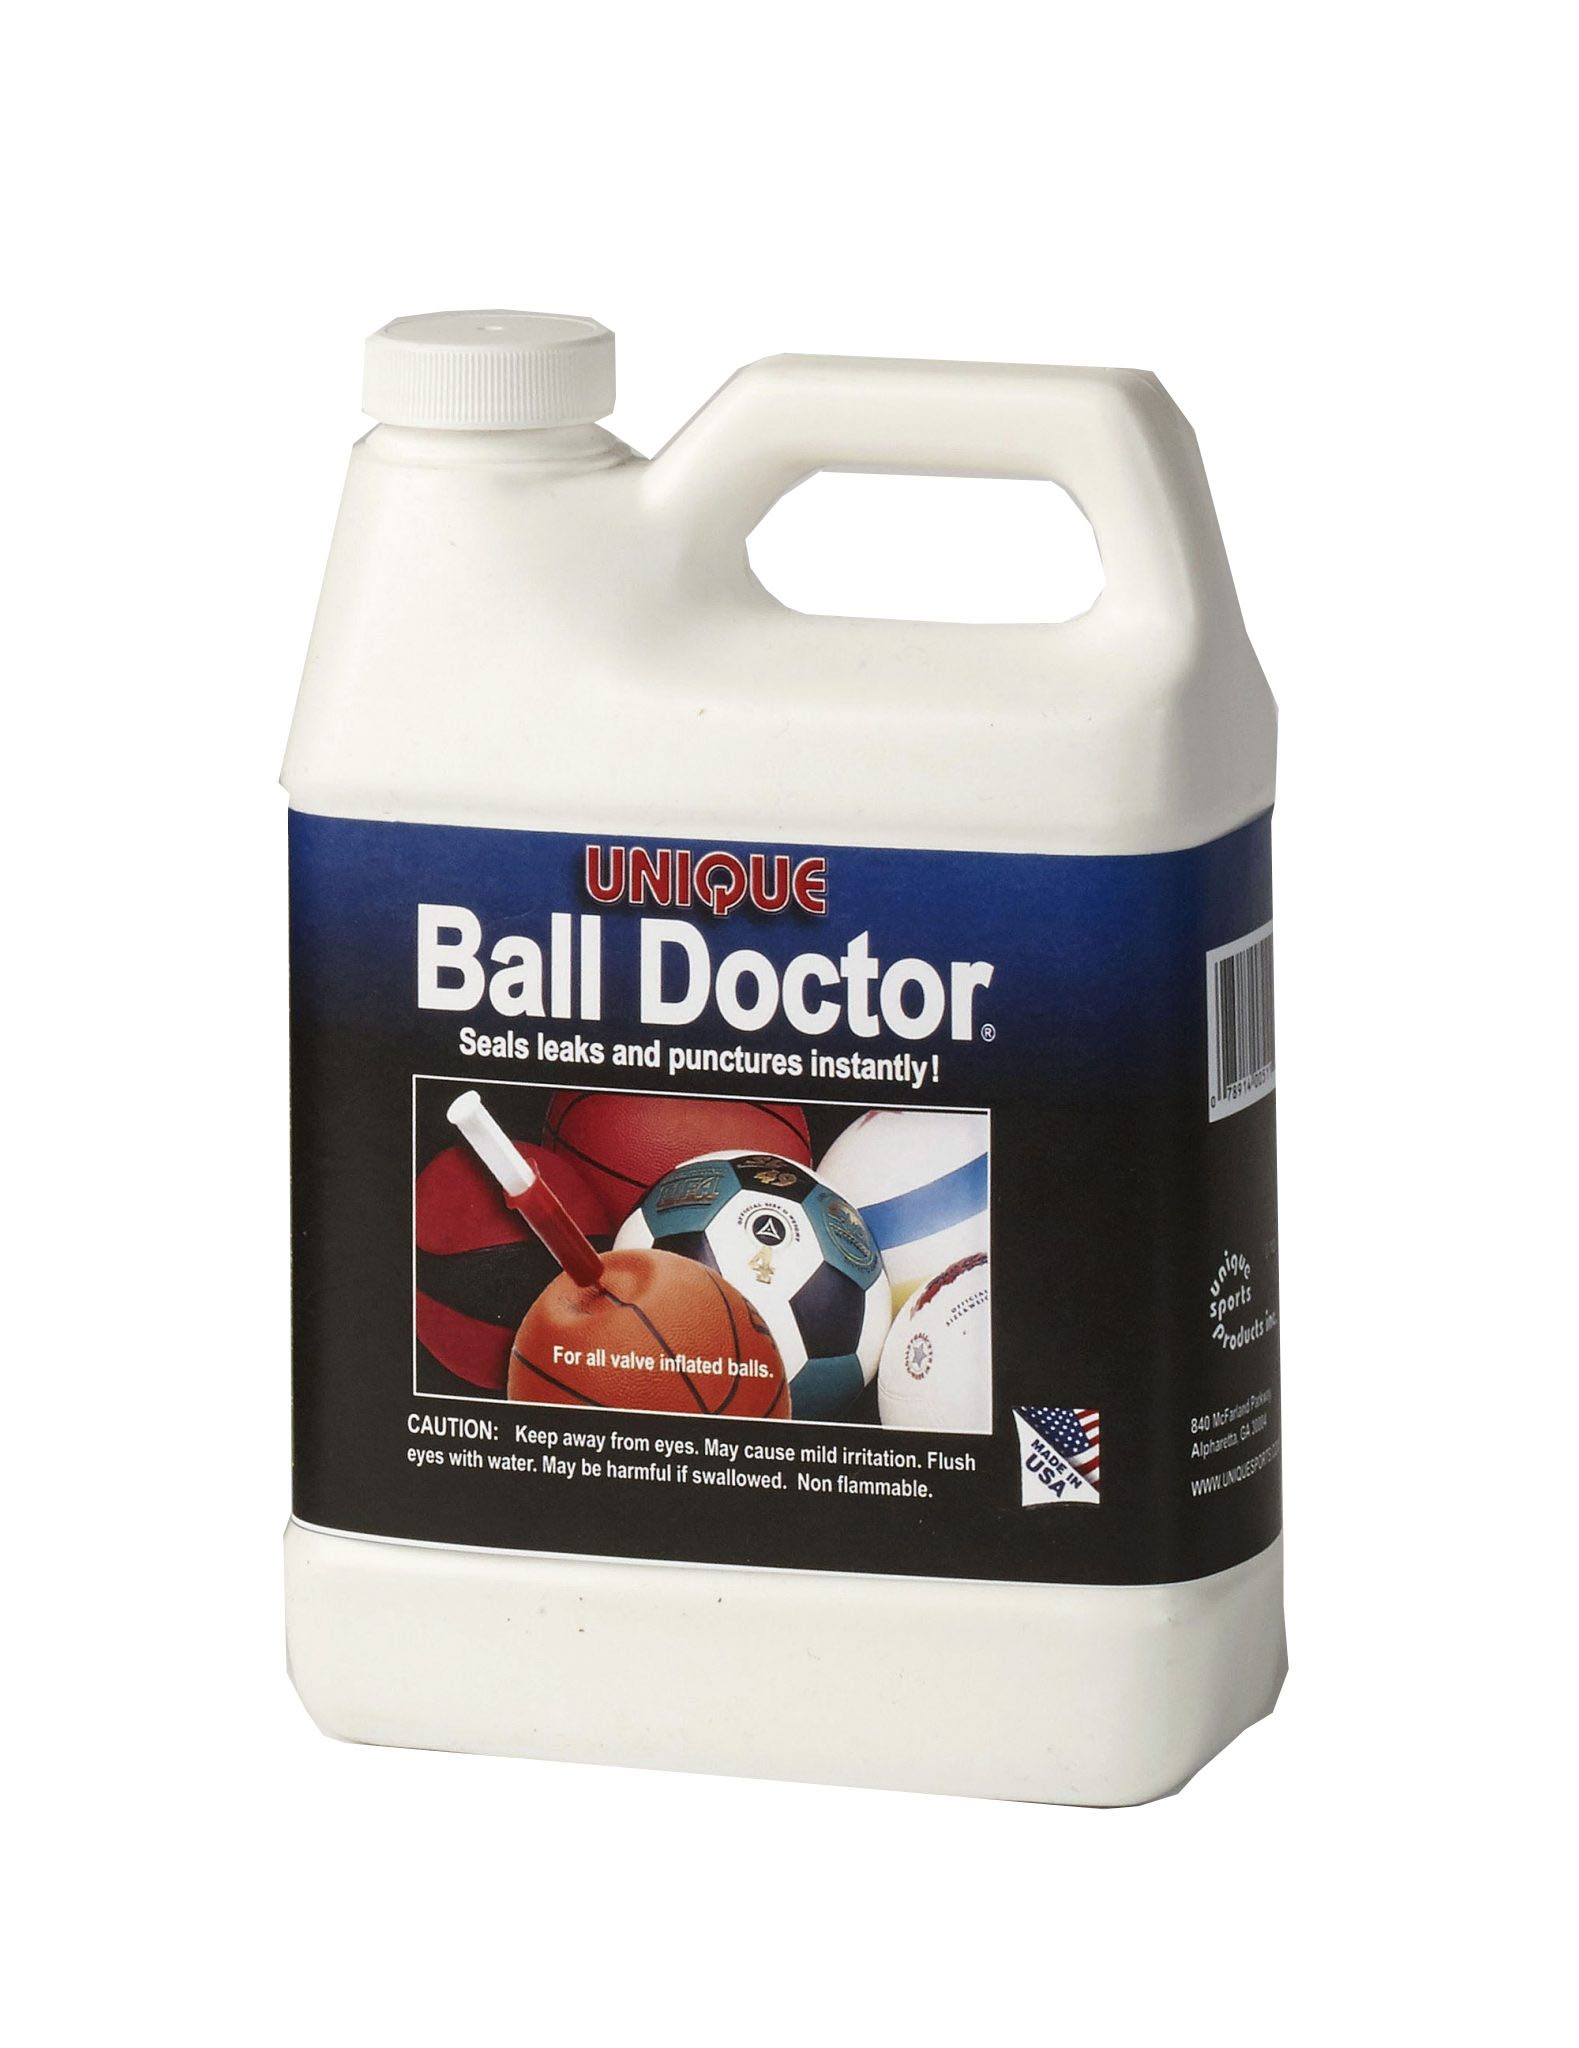 The Ball Doctor